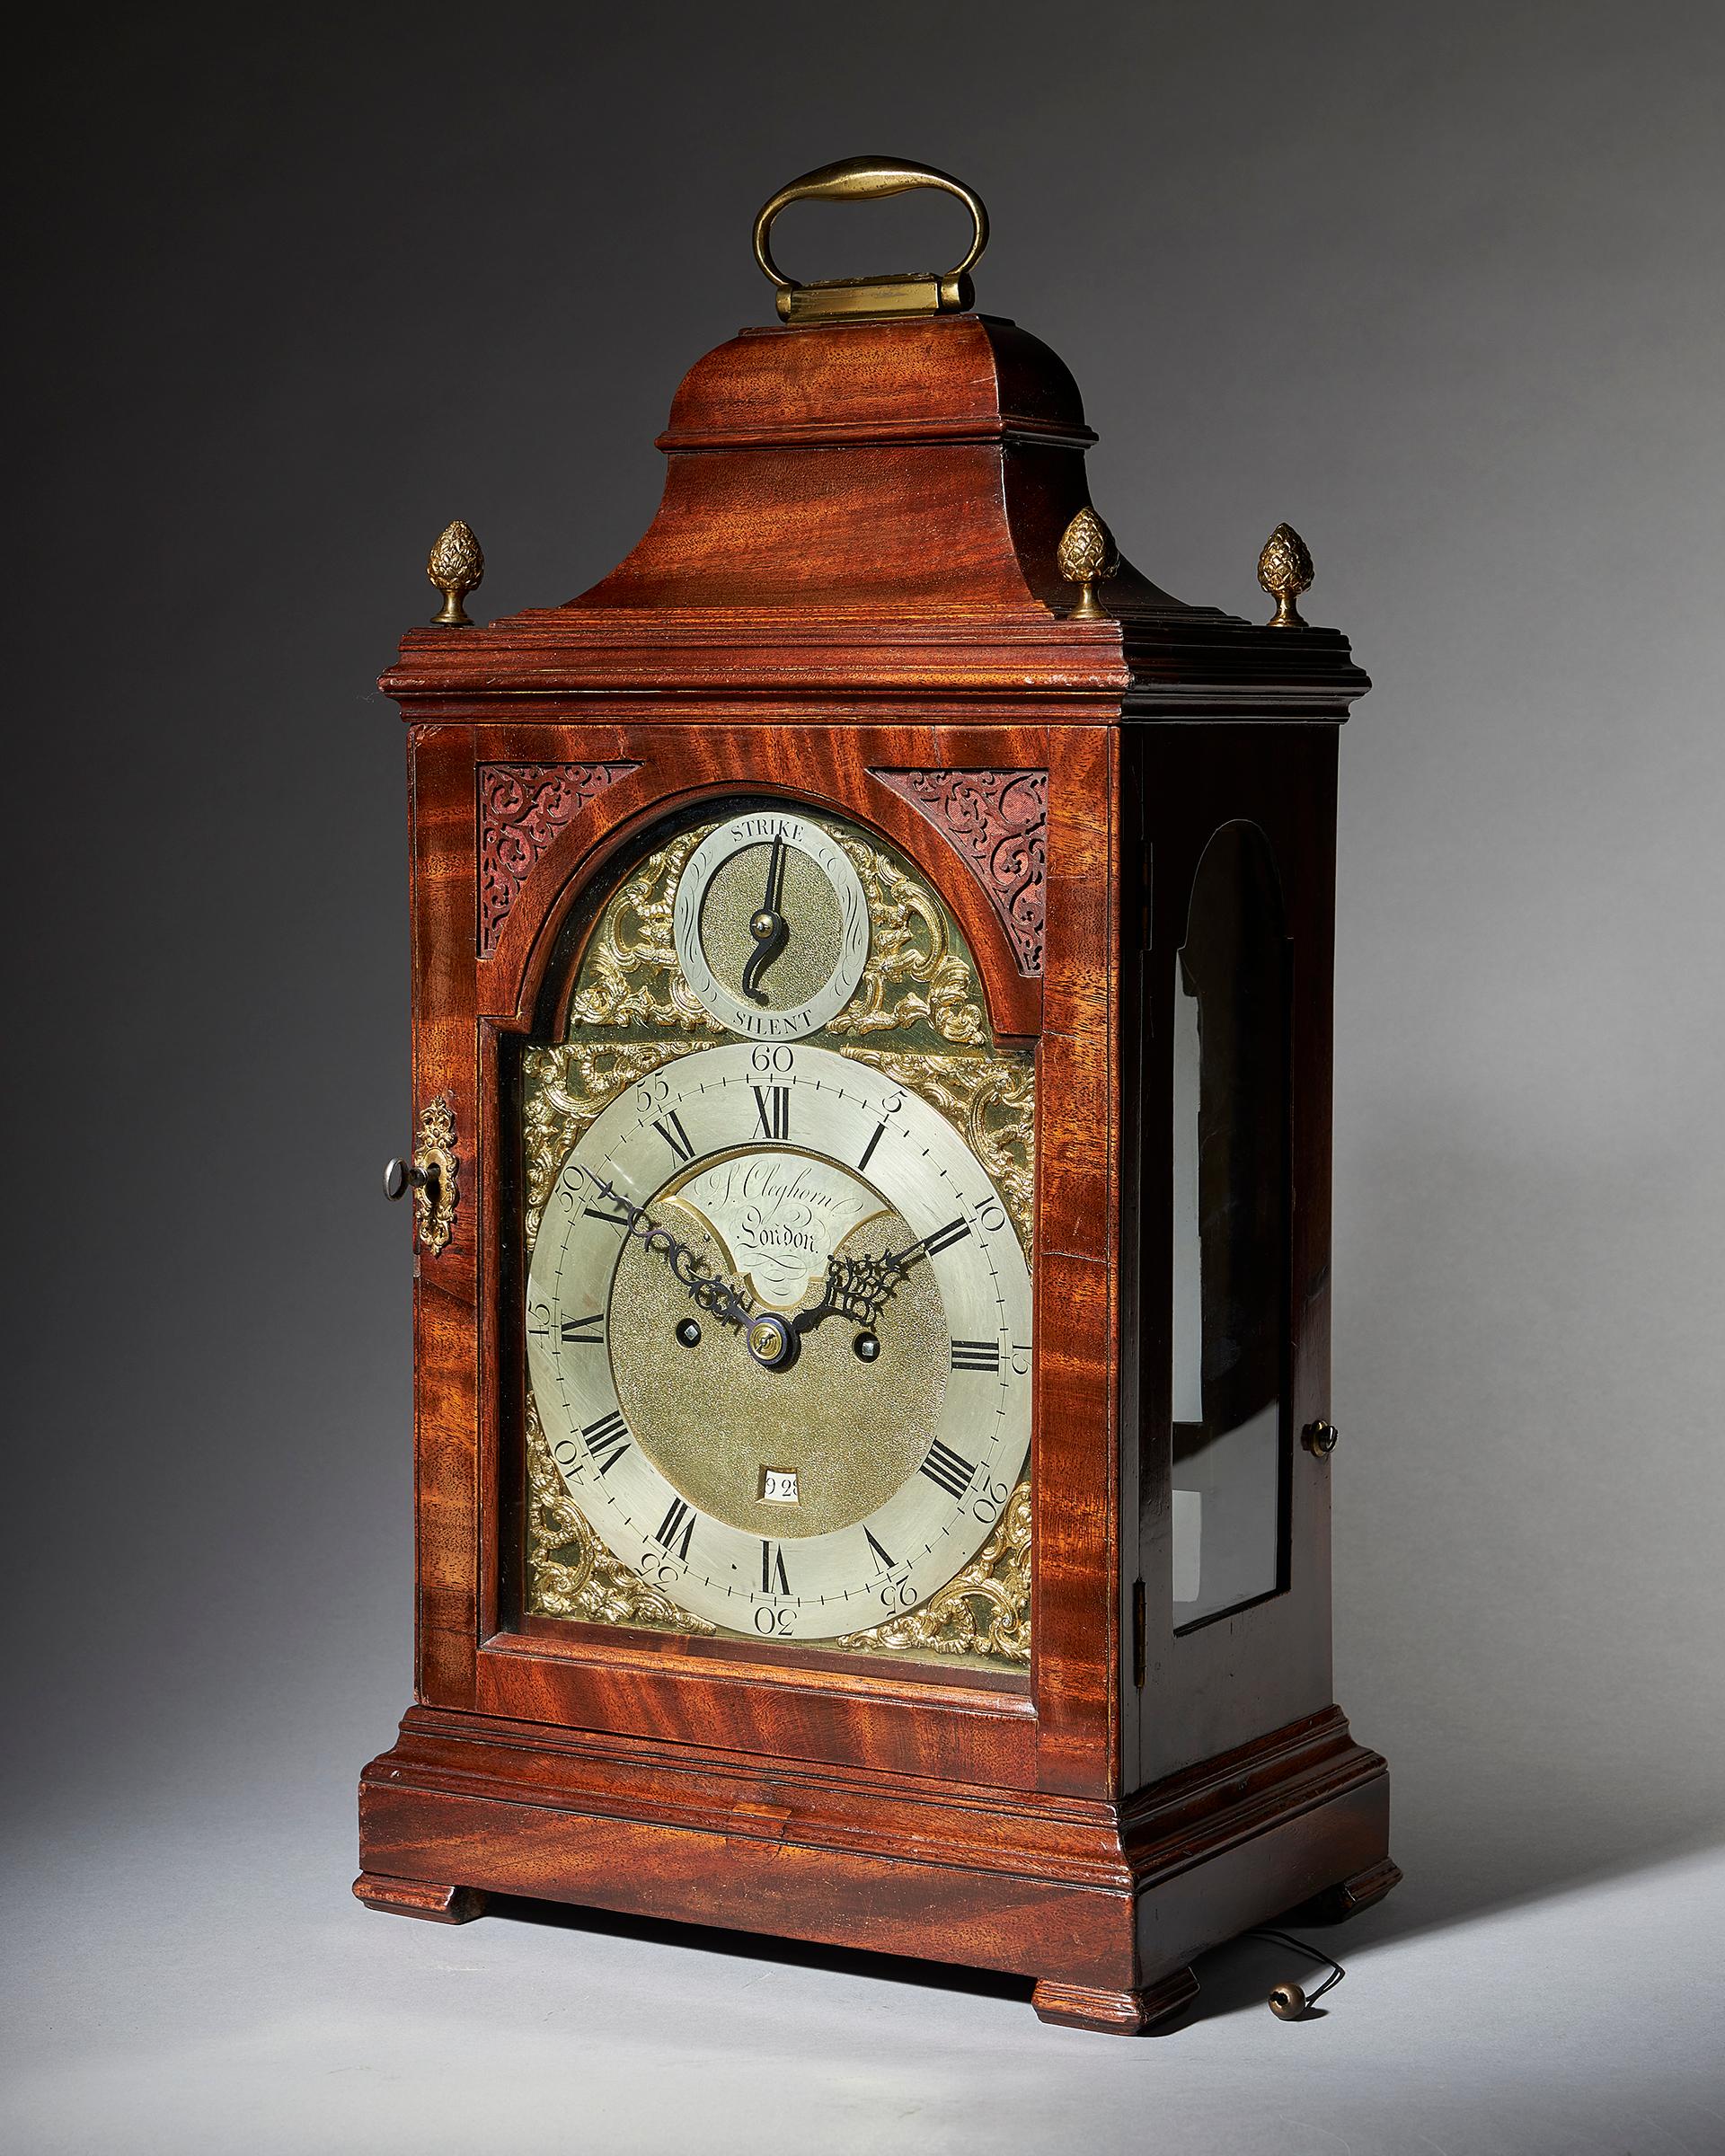 An 18th century English spring-driven mahogany table clock, signed on both the dial and the backplate S. Cleghorn London, made circa 1770-1775. The case is of classical shape for the period, with a bell top, arched doors to the front and rear, and